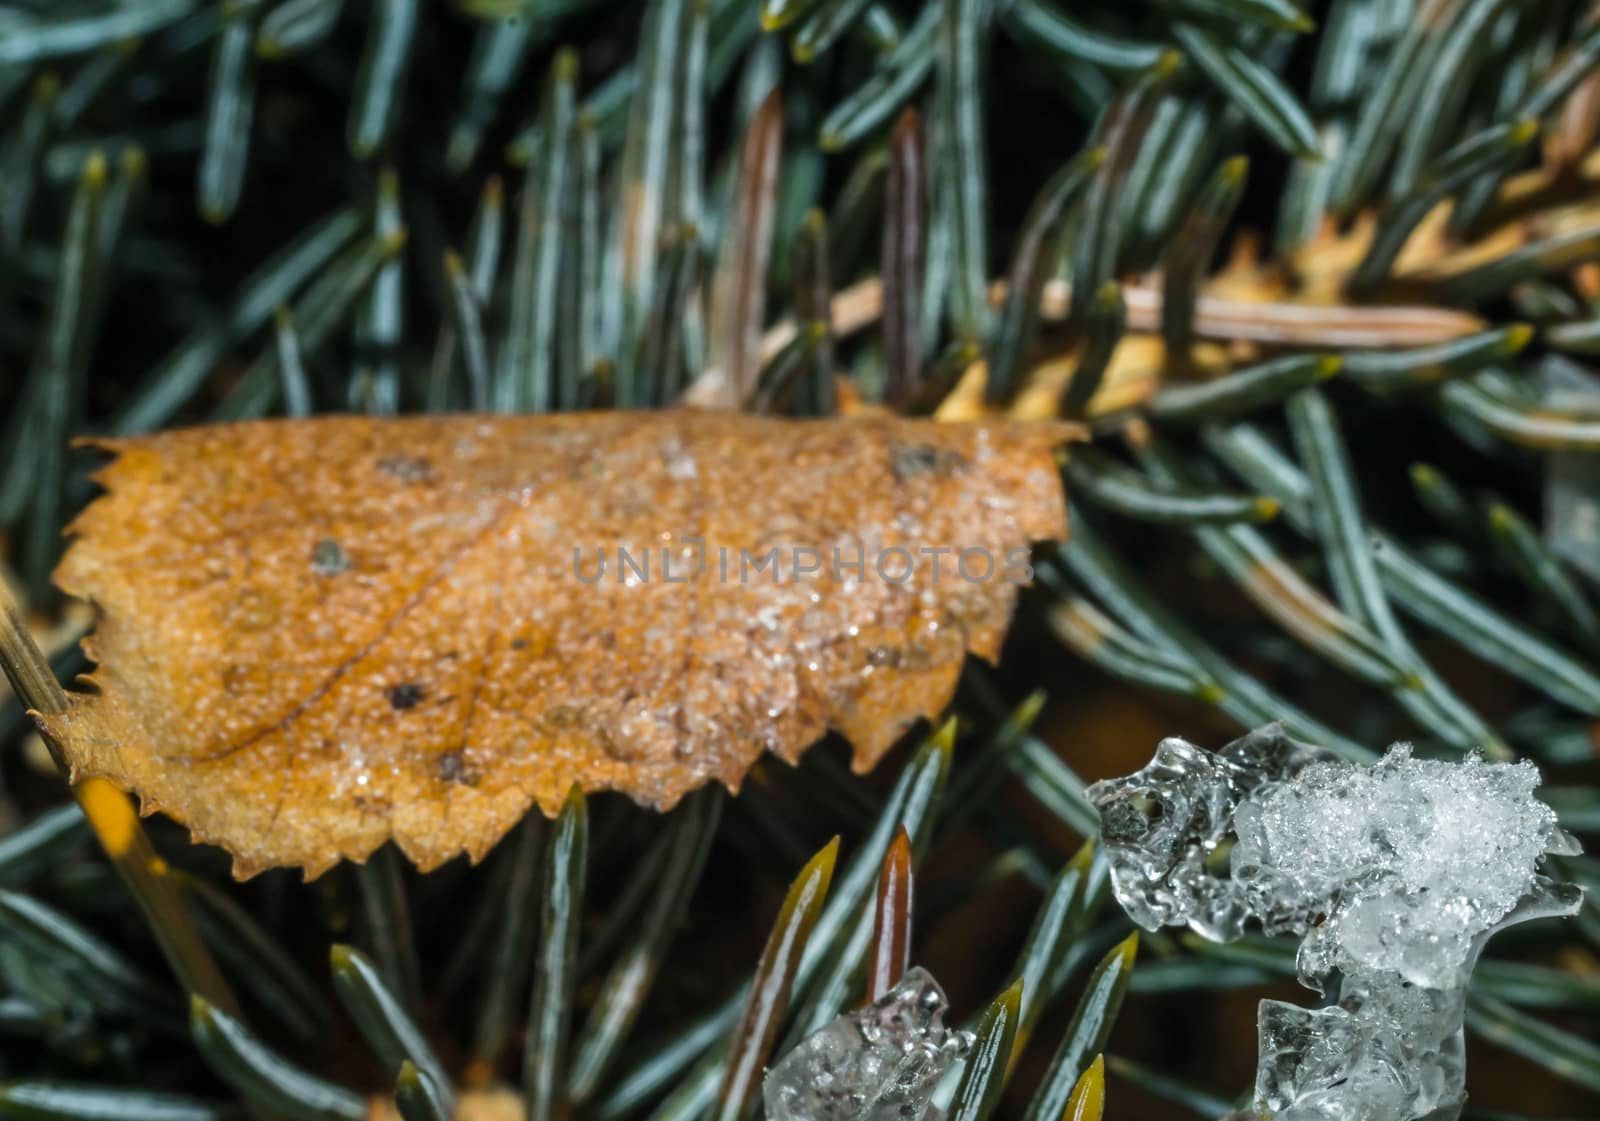 needle pine close-up winter by darksoul72